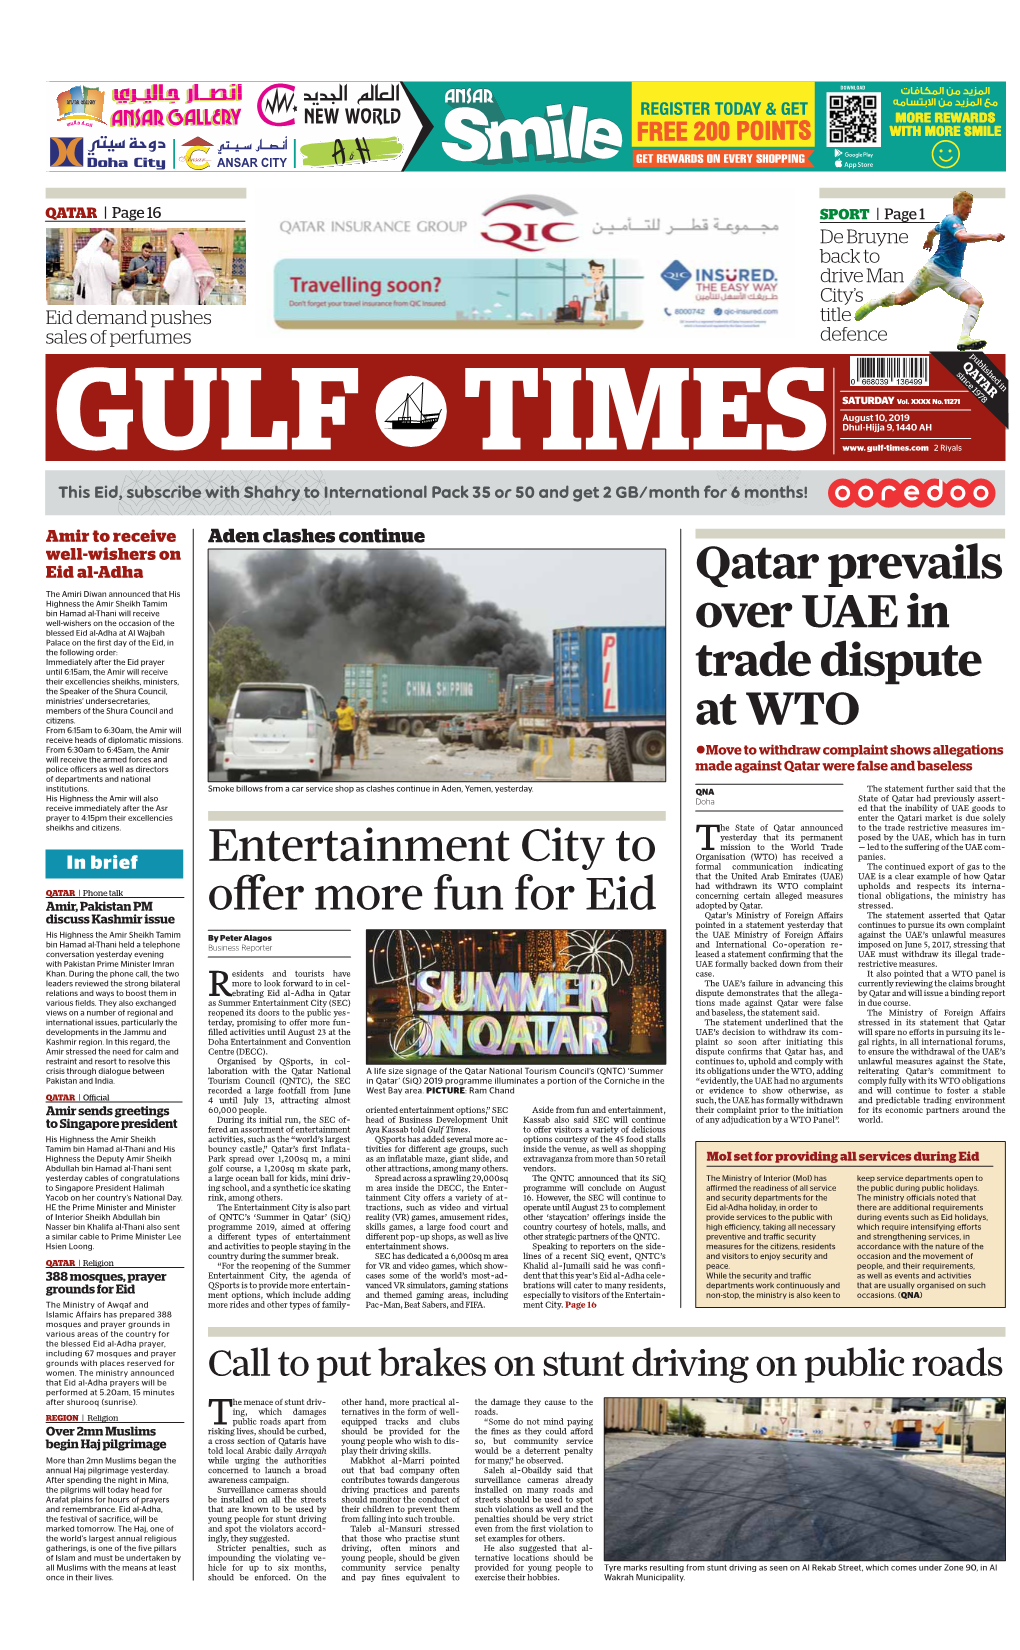 Qatar Prevails Over UAE in Trade Dispute at WTO Entertainment City to Offer More Fun For